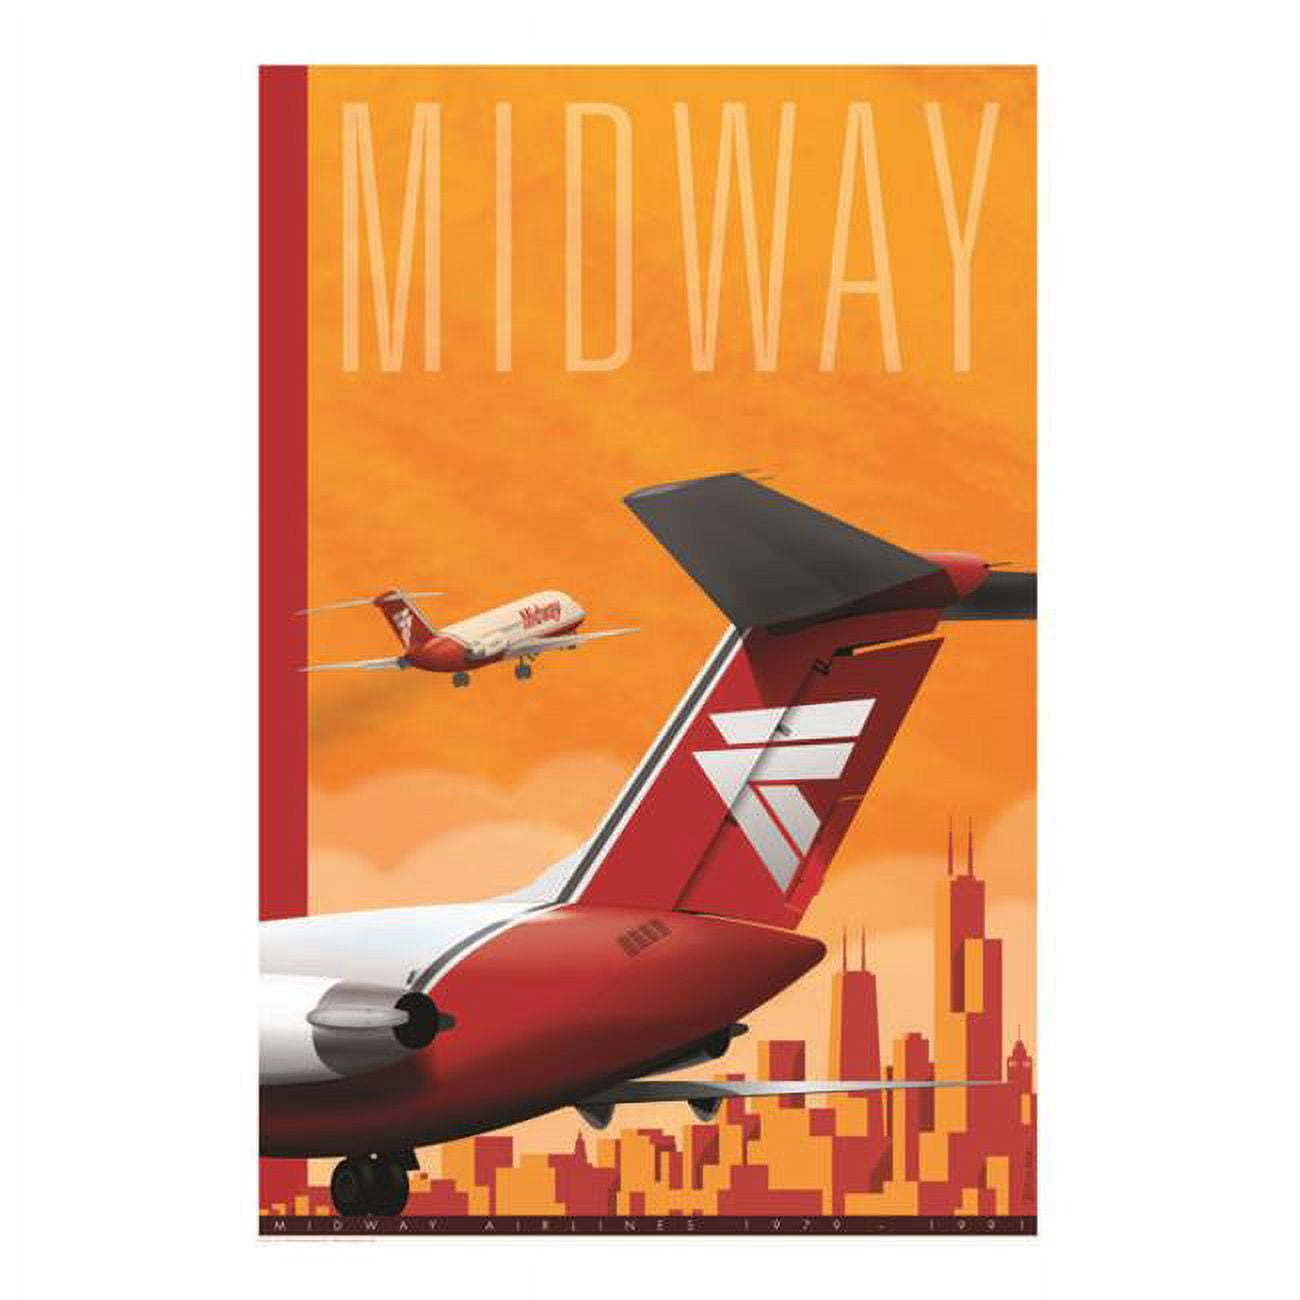 Ja056 14 X 20 In. Midway Airlines Tribute Poster